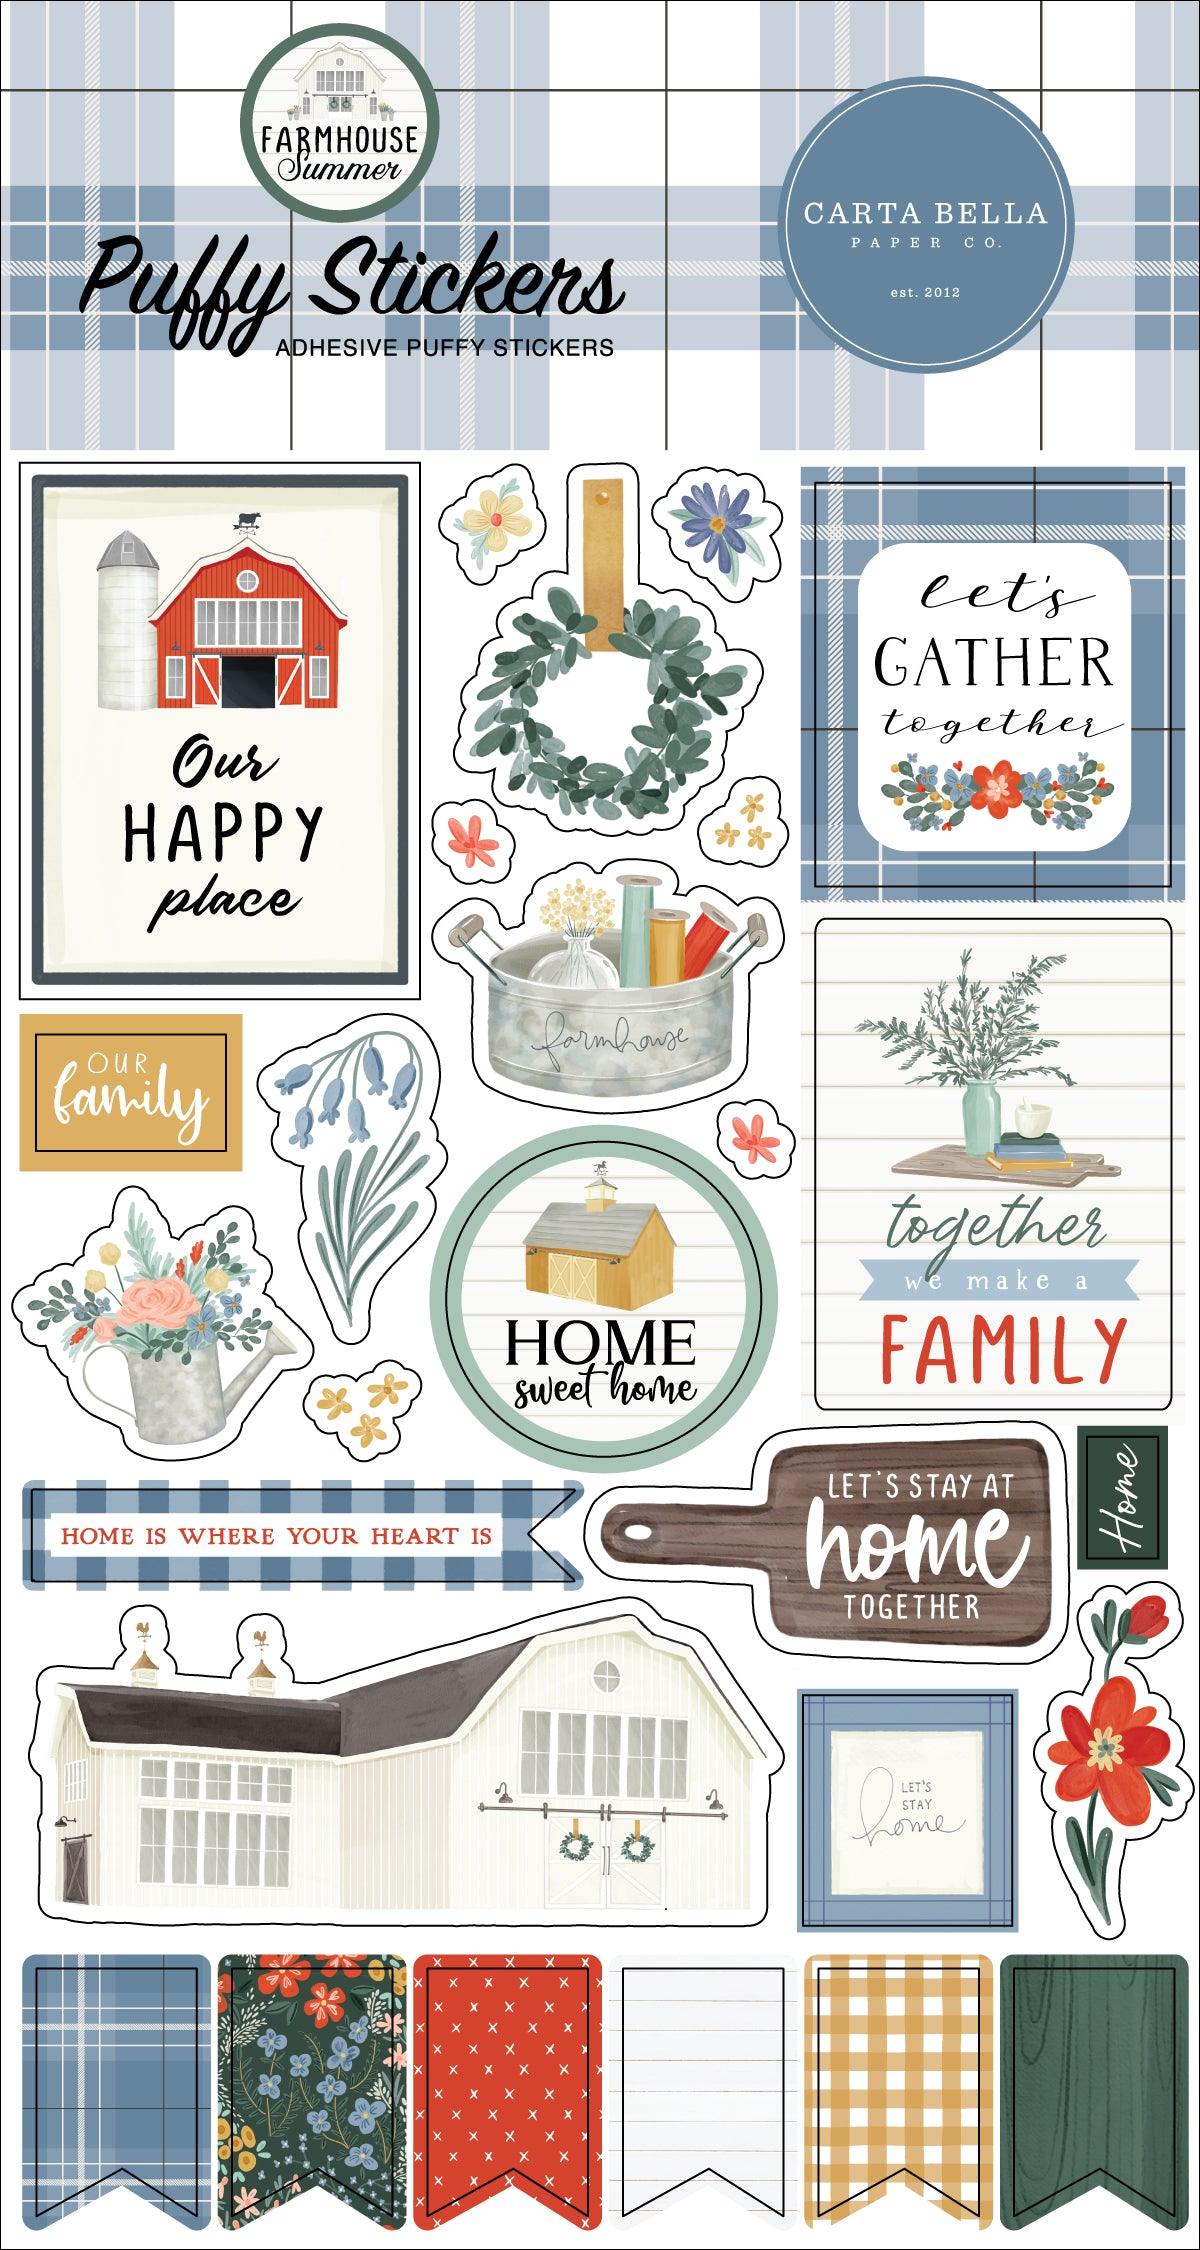 Farmhouse Summer Collection 4 x 7 Puffy Stickers Scrapbook Embellishments by Carta Bella Paper - Scrapbook Supply Companies